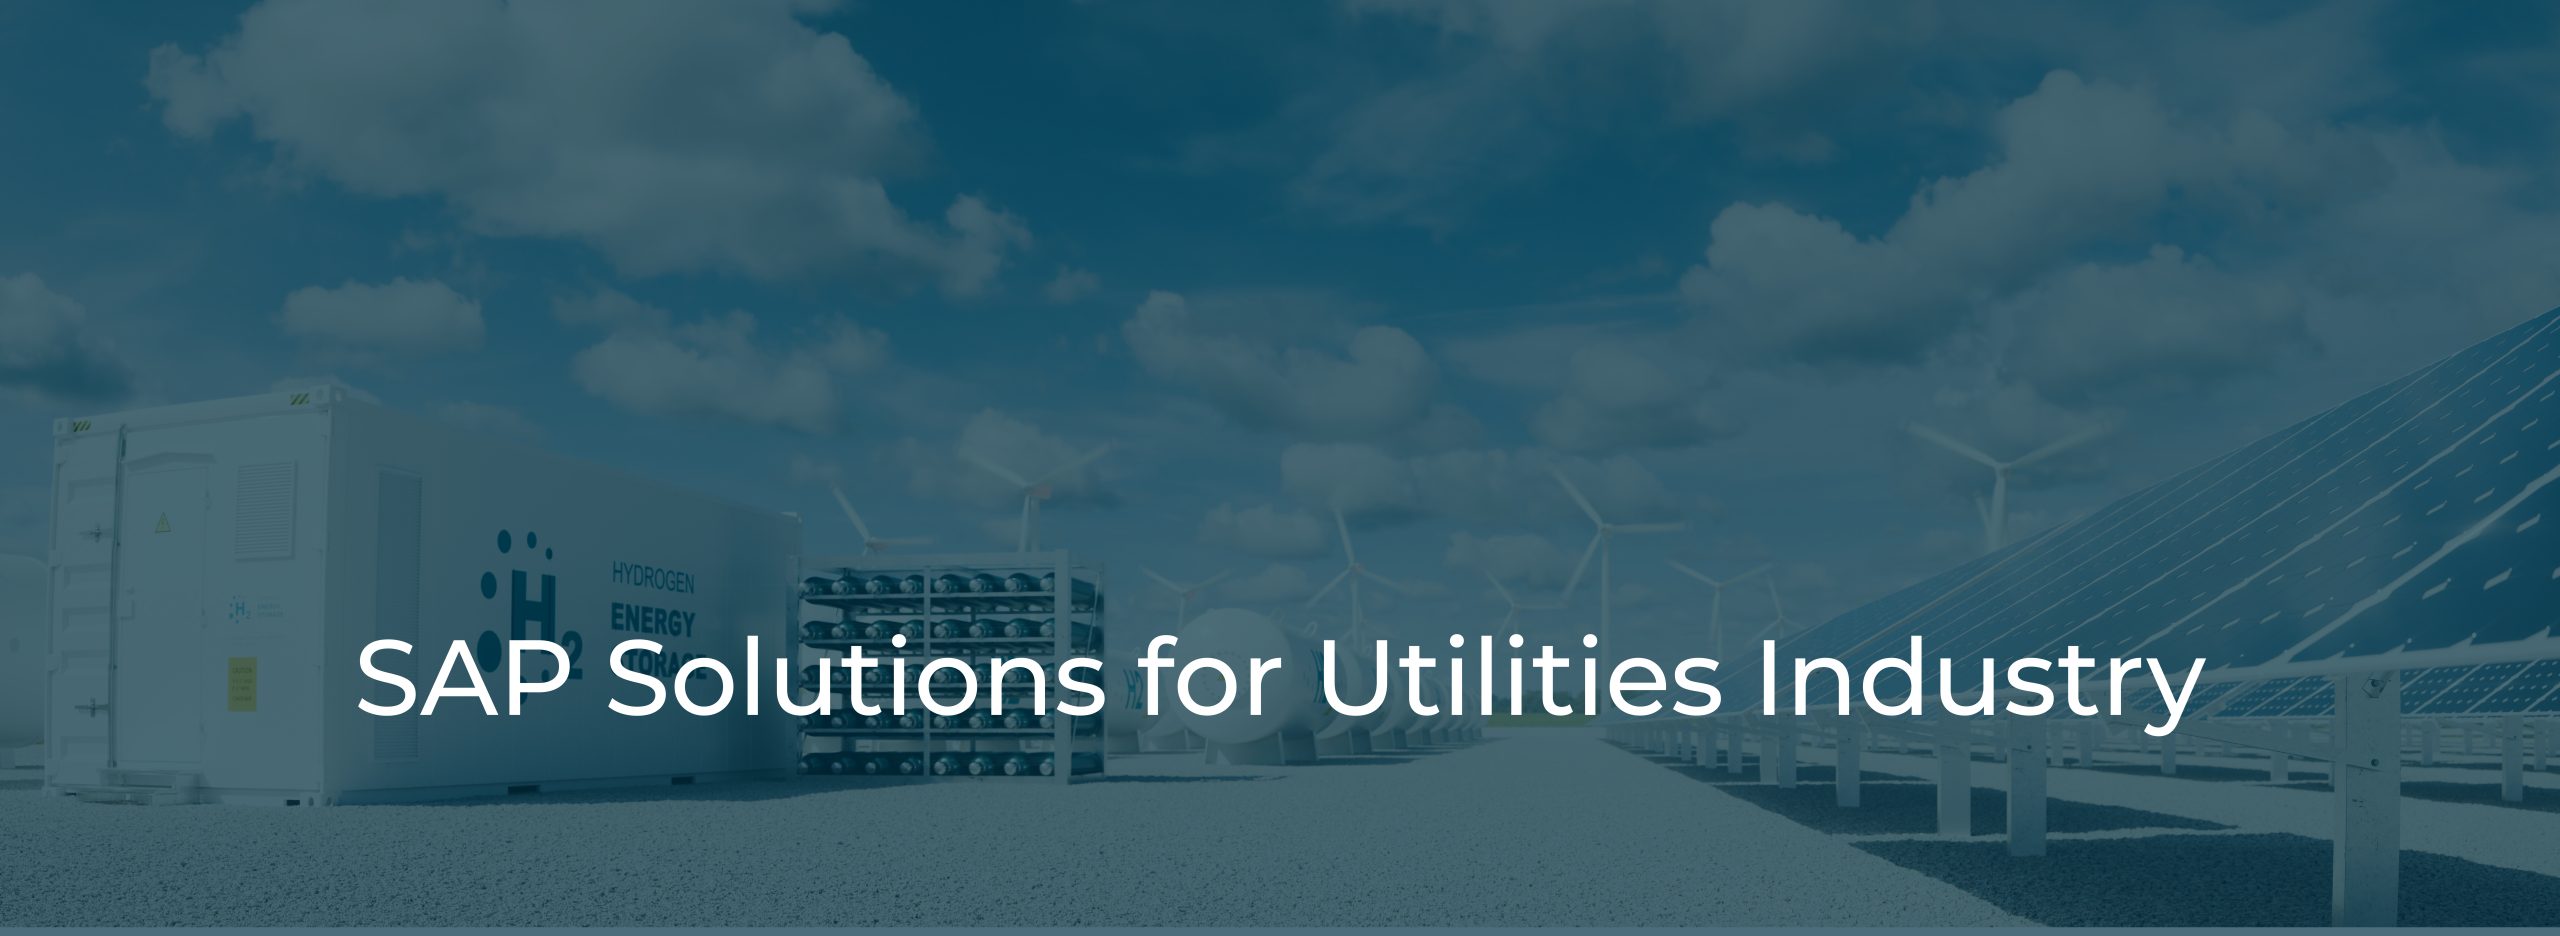 SAP Solutions for Utilities Industry